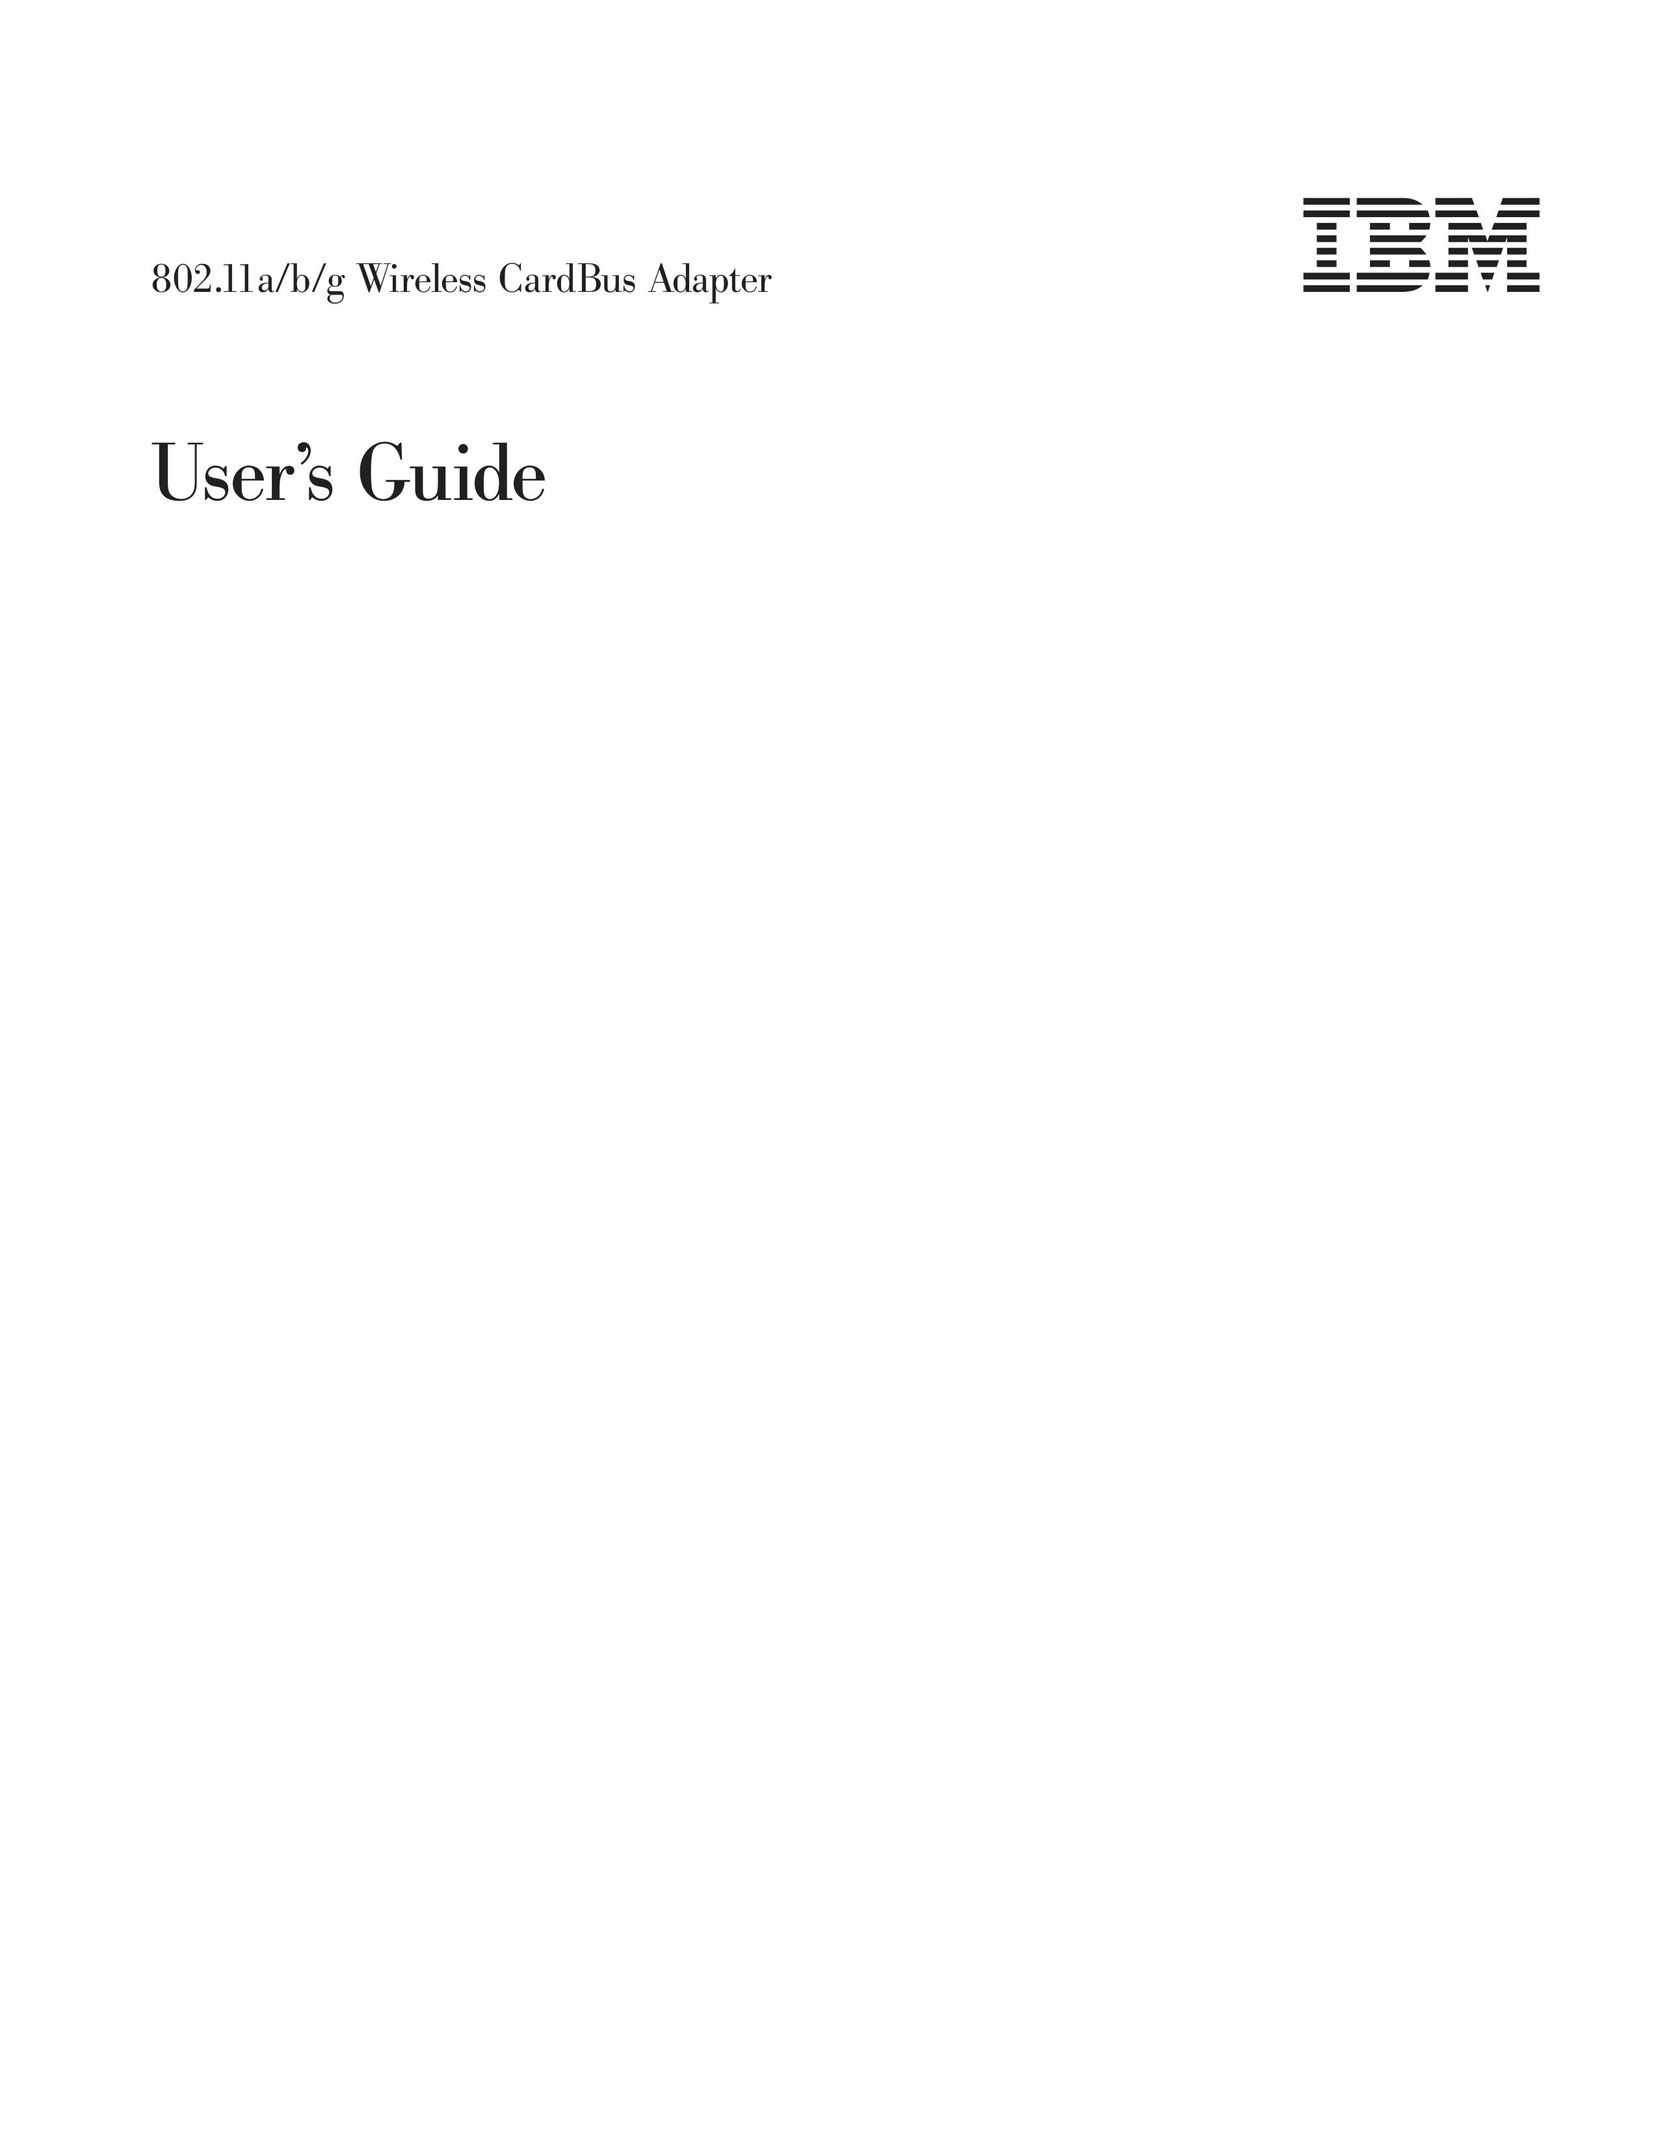 Trust Computer Products IBM 802.11a/b/g Wireless CardBus Adapter Network Card User Manual